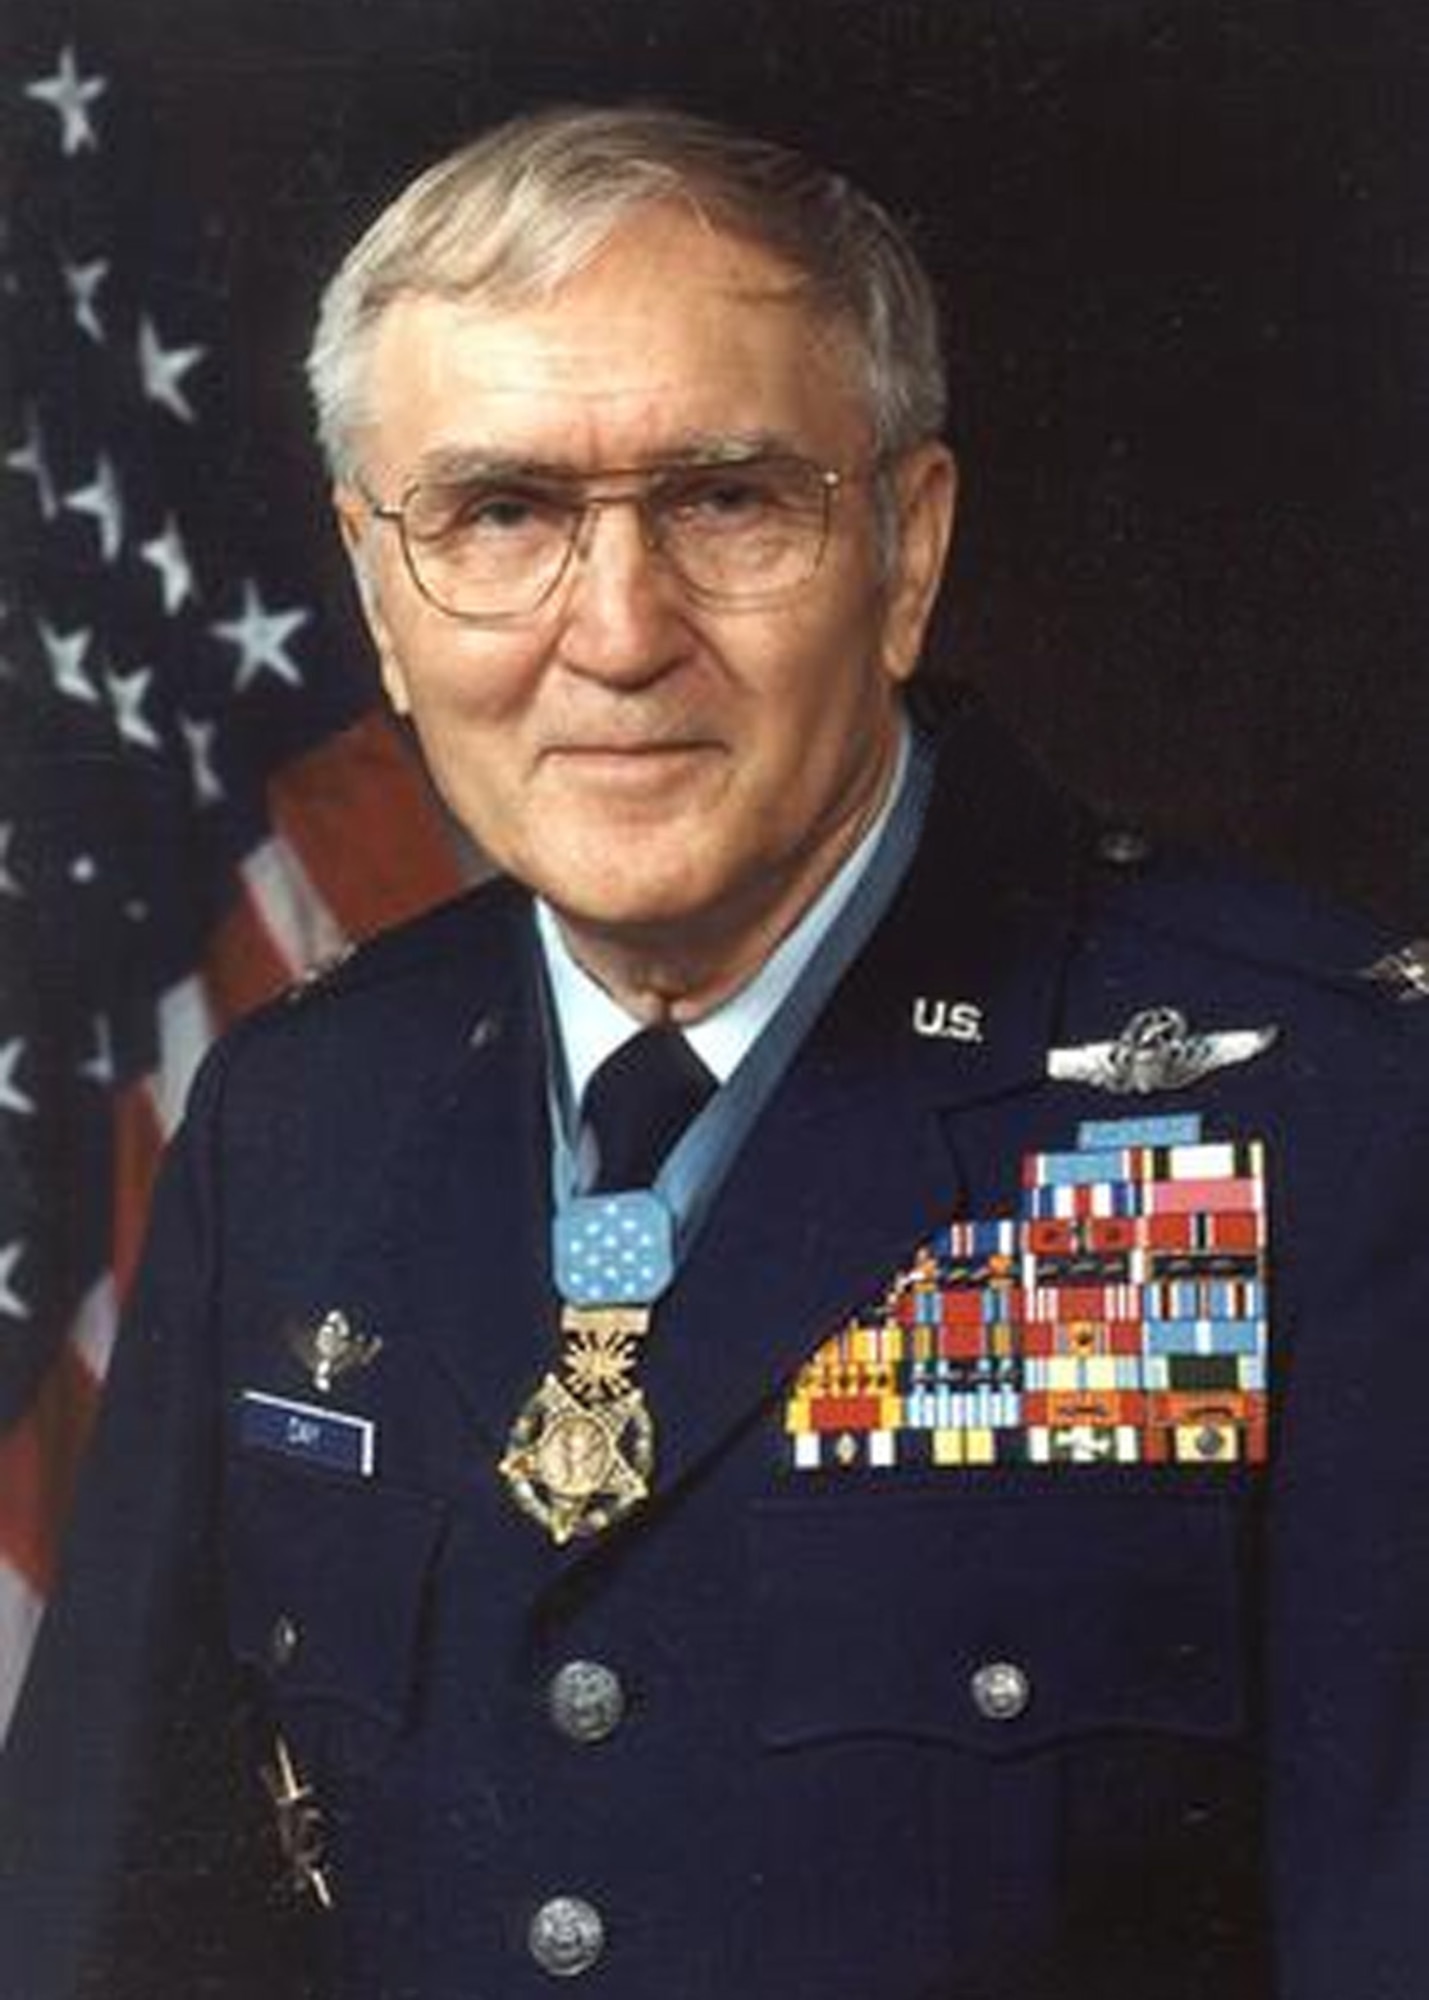 George Everett "Bud" Day is a retired U.S. Air Force Colonel and Command Pilot who served during the Vietnam War.  He is often cited as being the most decorated U.S. service member since General Douglas MacArthur, having received some seventy decorations, a majority for actions in combat. (Courtesy photo)